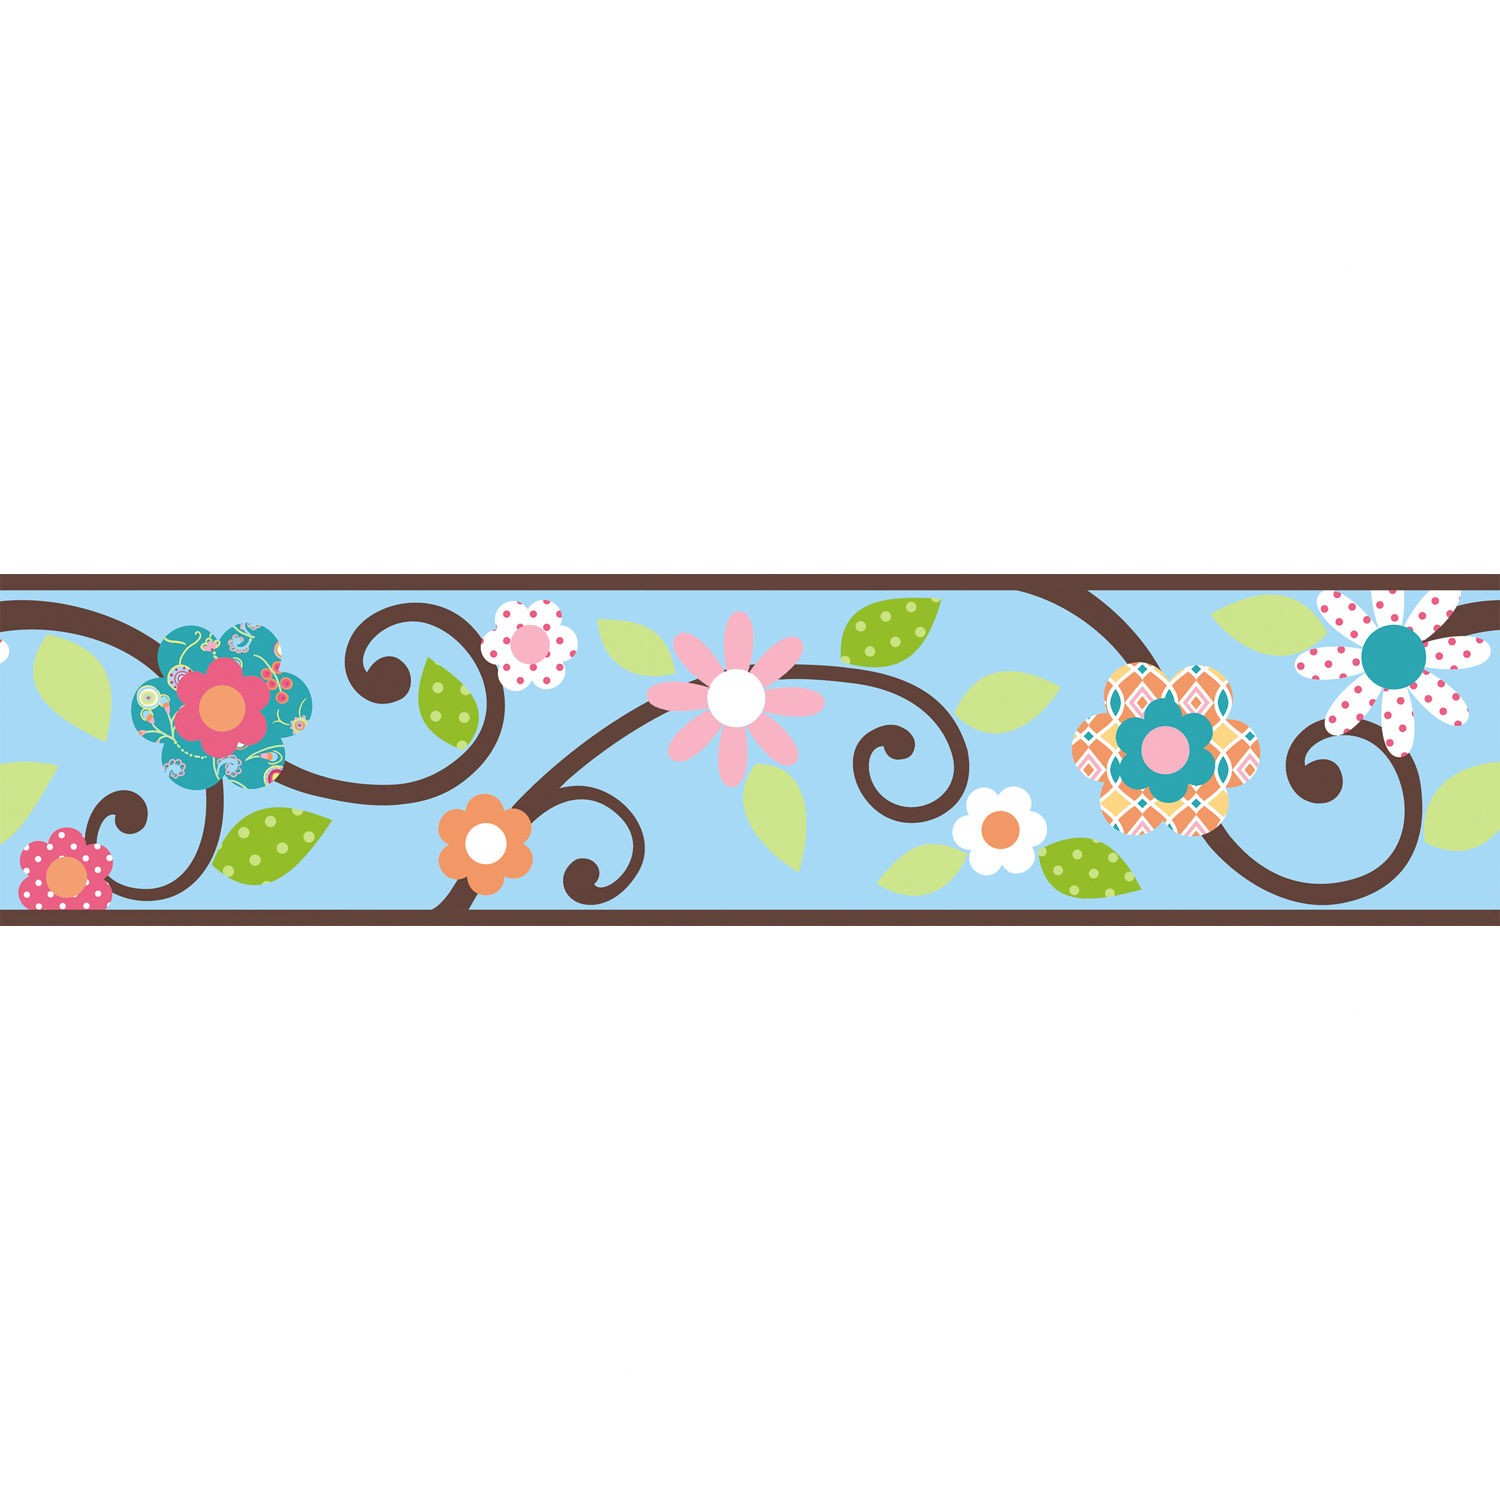 Room Mates Studio Designs Scroll Floral Wall Border In Brown Teal